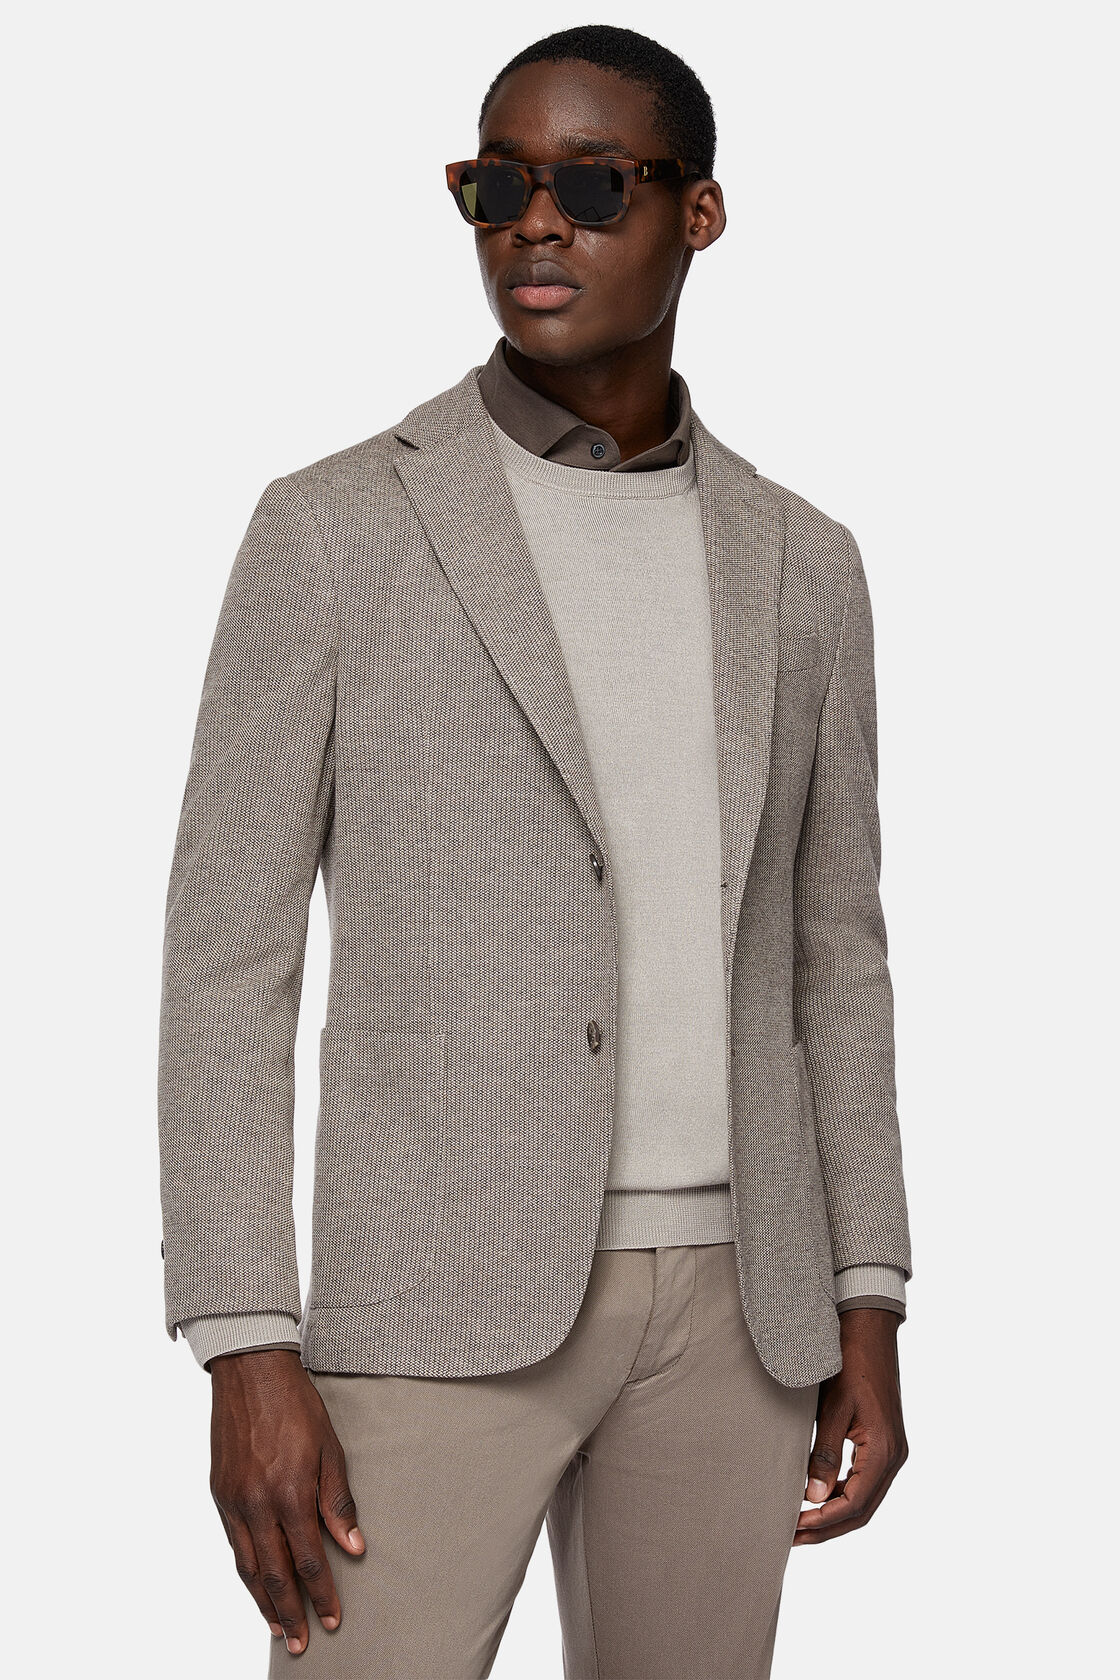 B Jersey Dove Grey Jacket In Cotton Blend, Taupe, hi-res